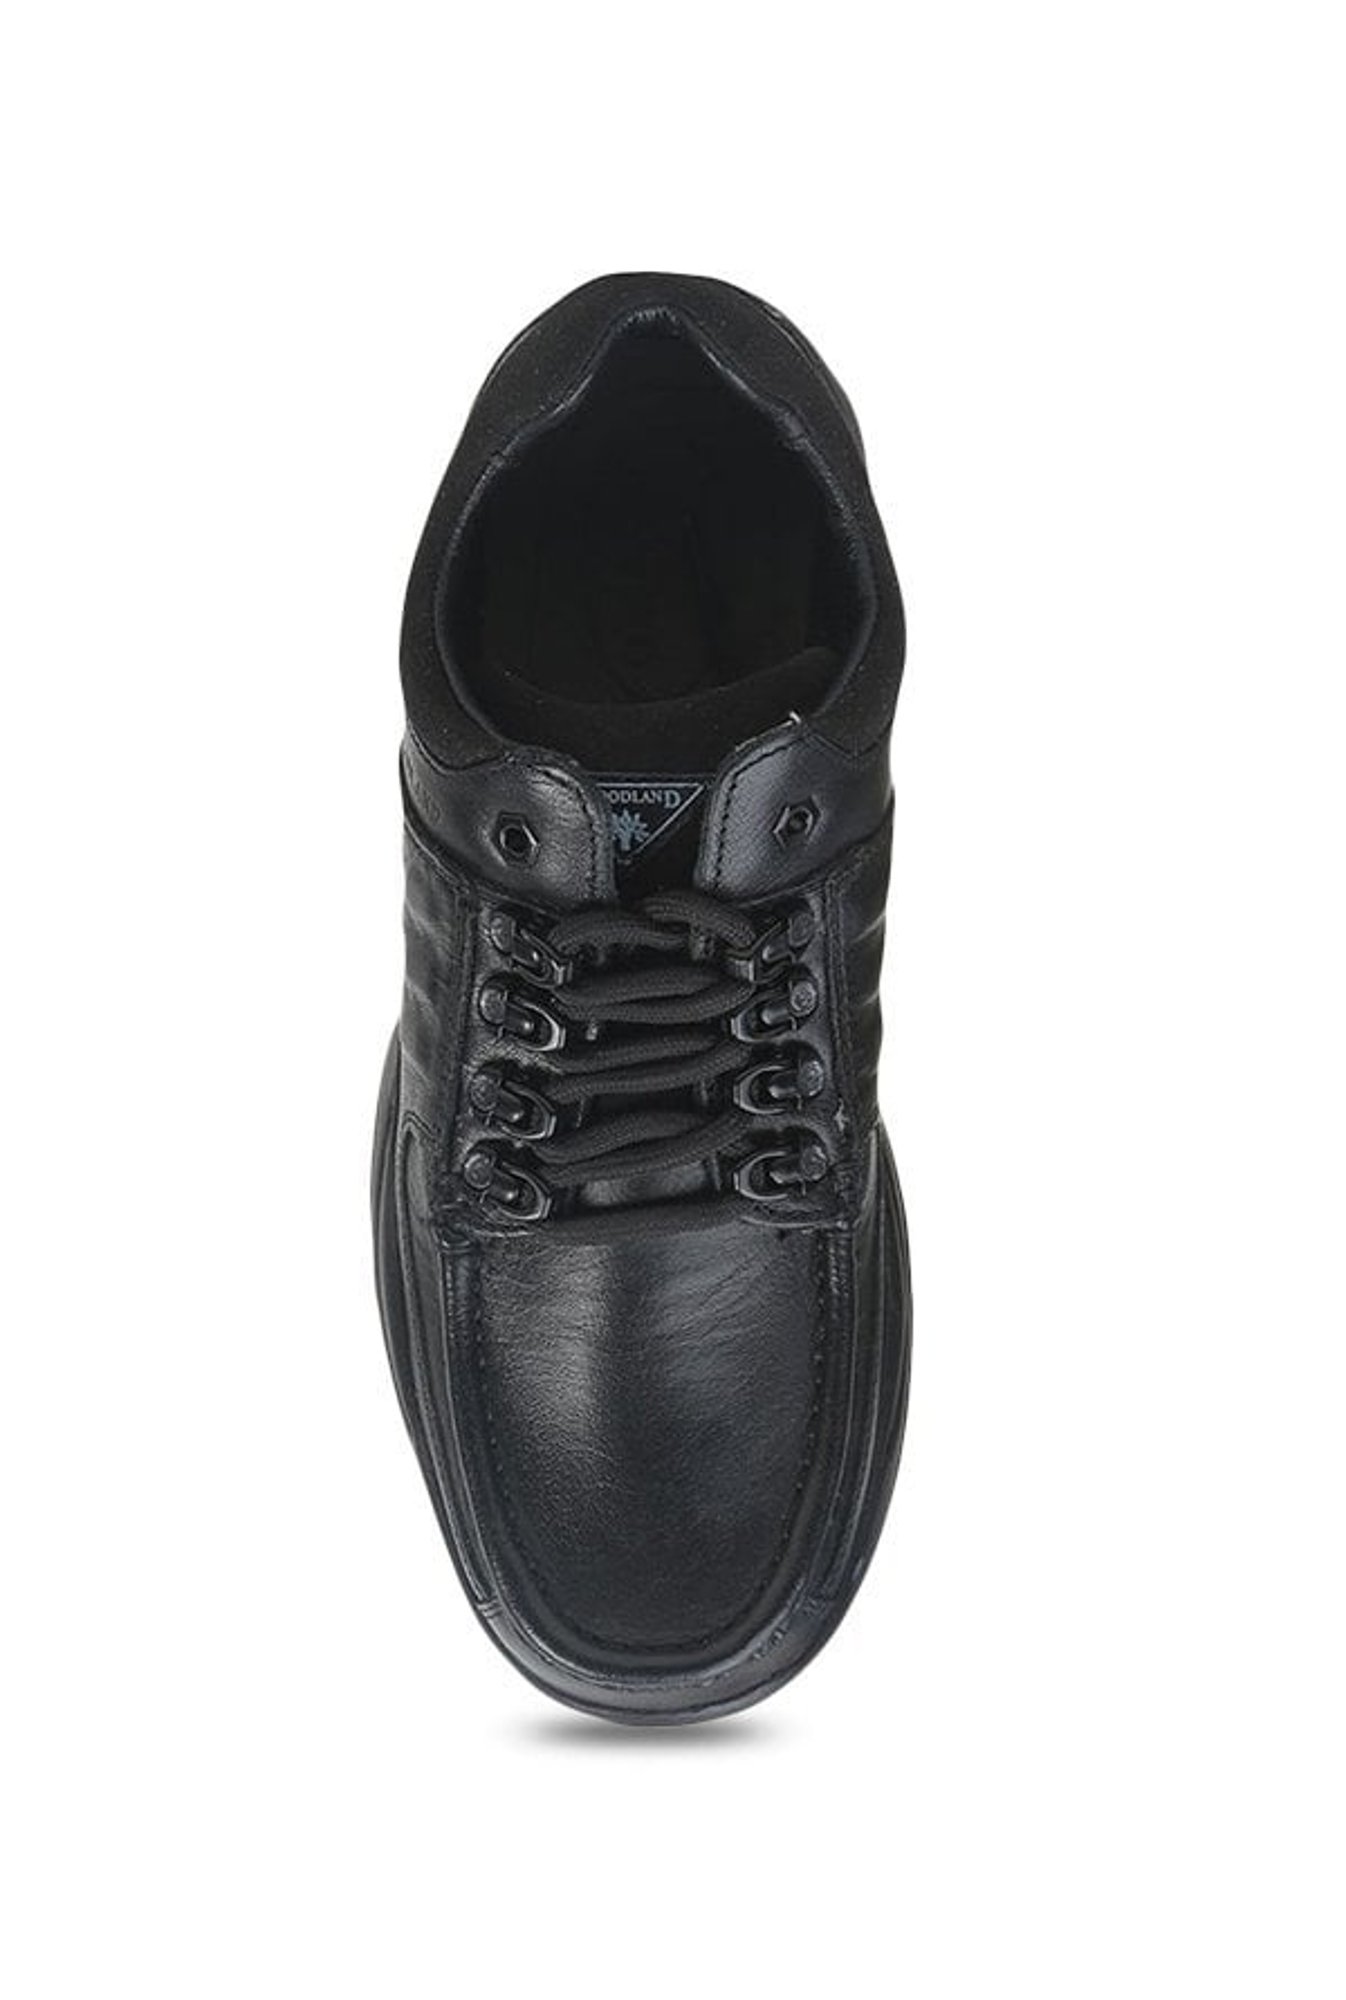 woodland black casual shoes Best-Selling Promotional Products | Bulk &  Wholesale | Free Shipping